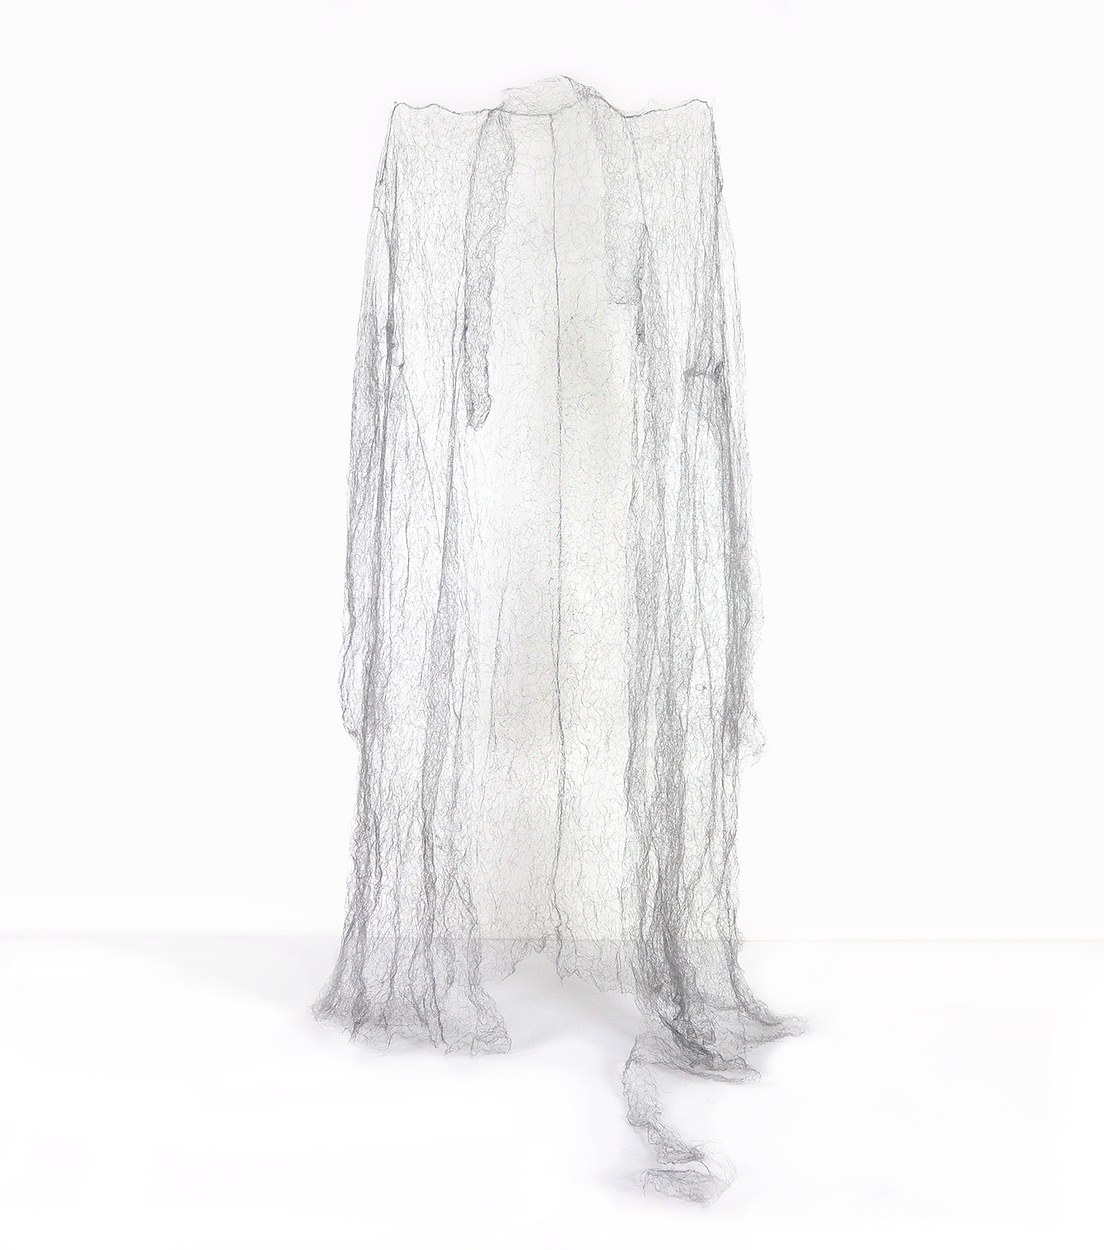 Funeral Clothes for the Women no.4_120x160cm_monofilament_2020